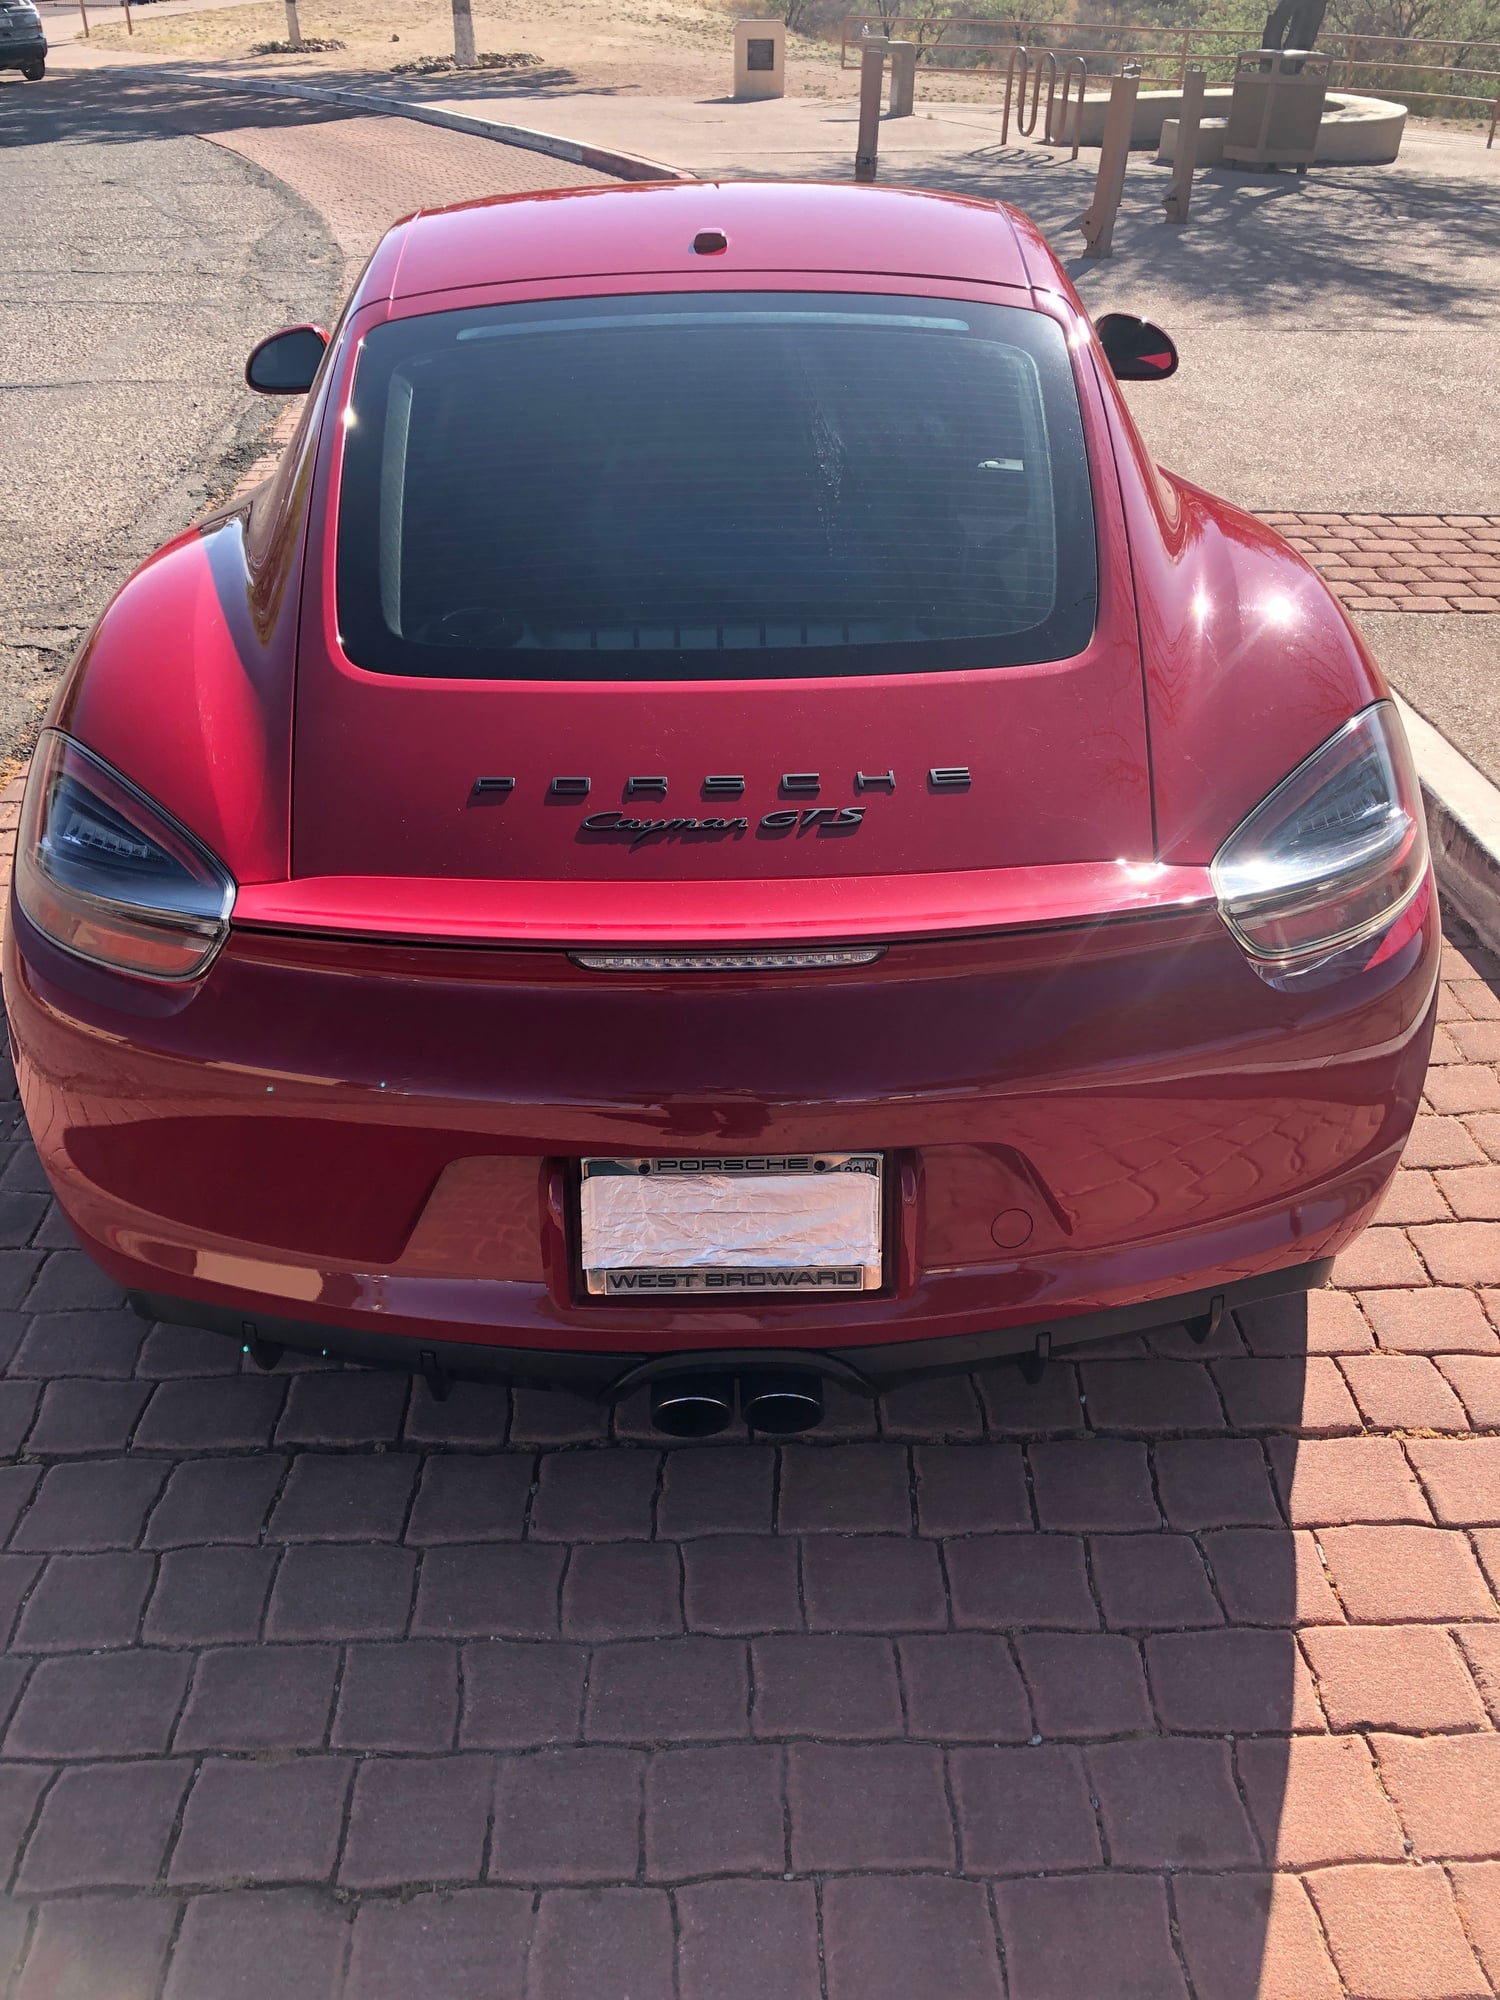 2016 Porsche Cayman - 2016 PORSCHE CAYMAN GTS - Used - VIN WP0AB2A84GK186445 - 17,700 Miles - 6 cyl - 2WD - Automatic - Coupe - Red - Nogales, AZ 85621, United States